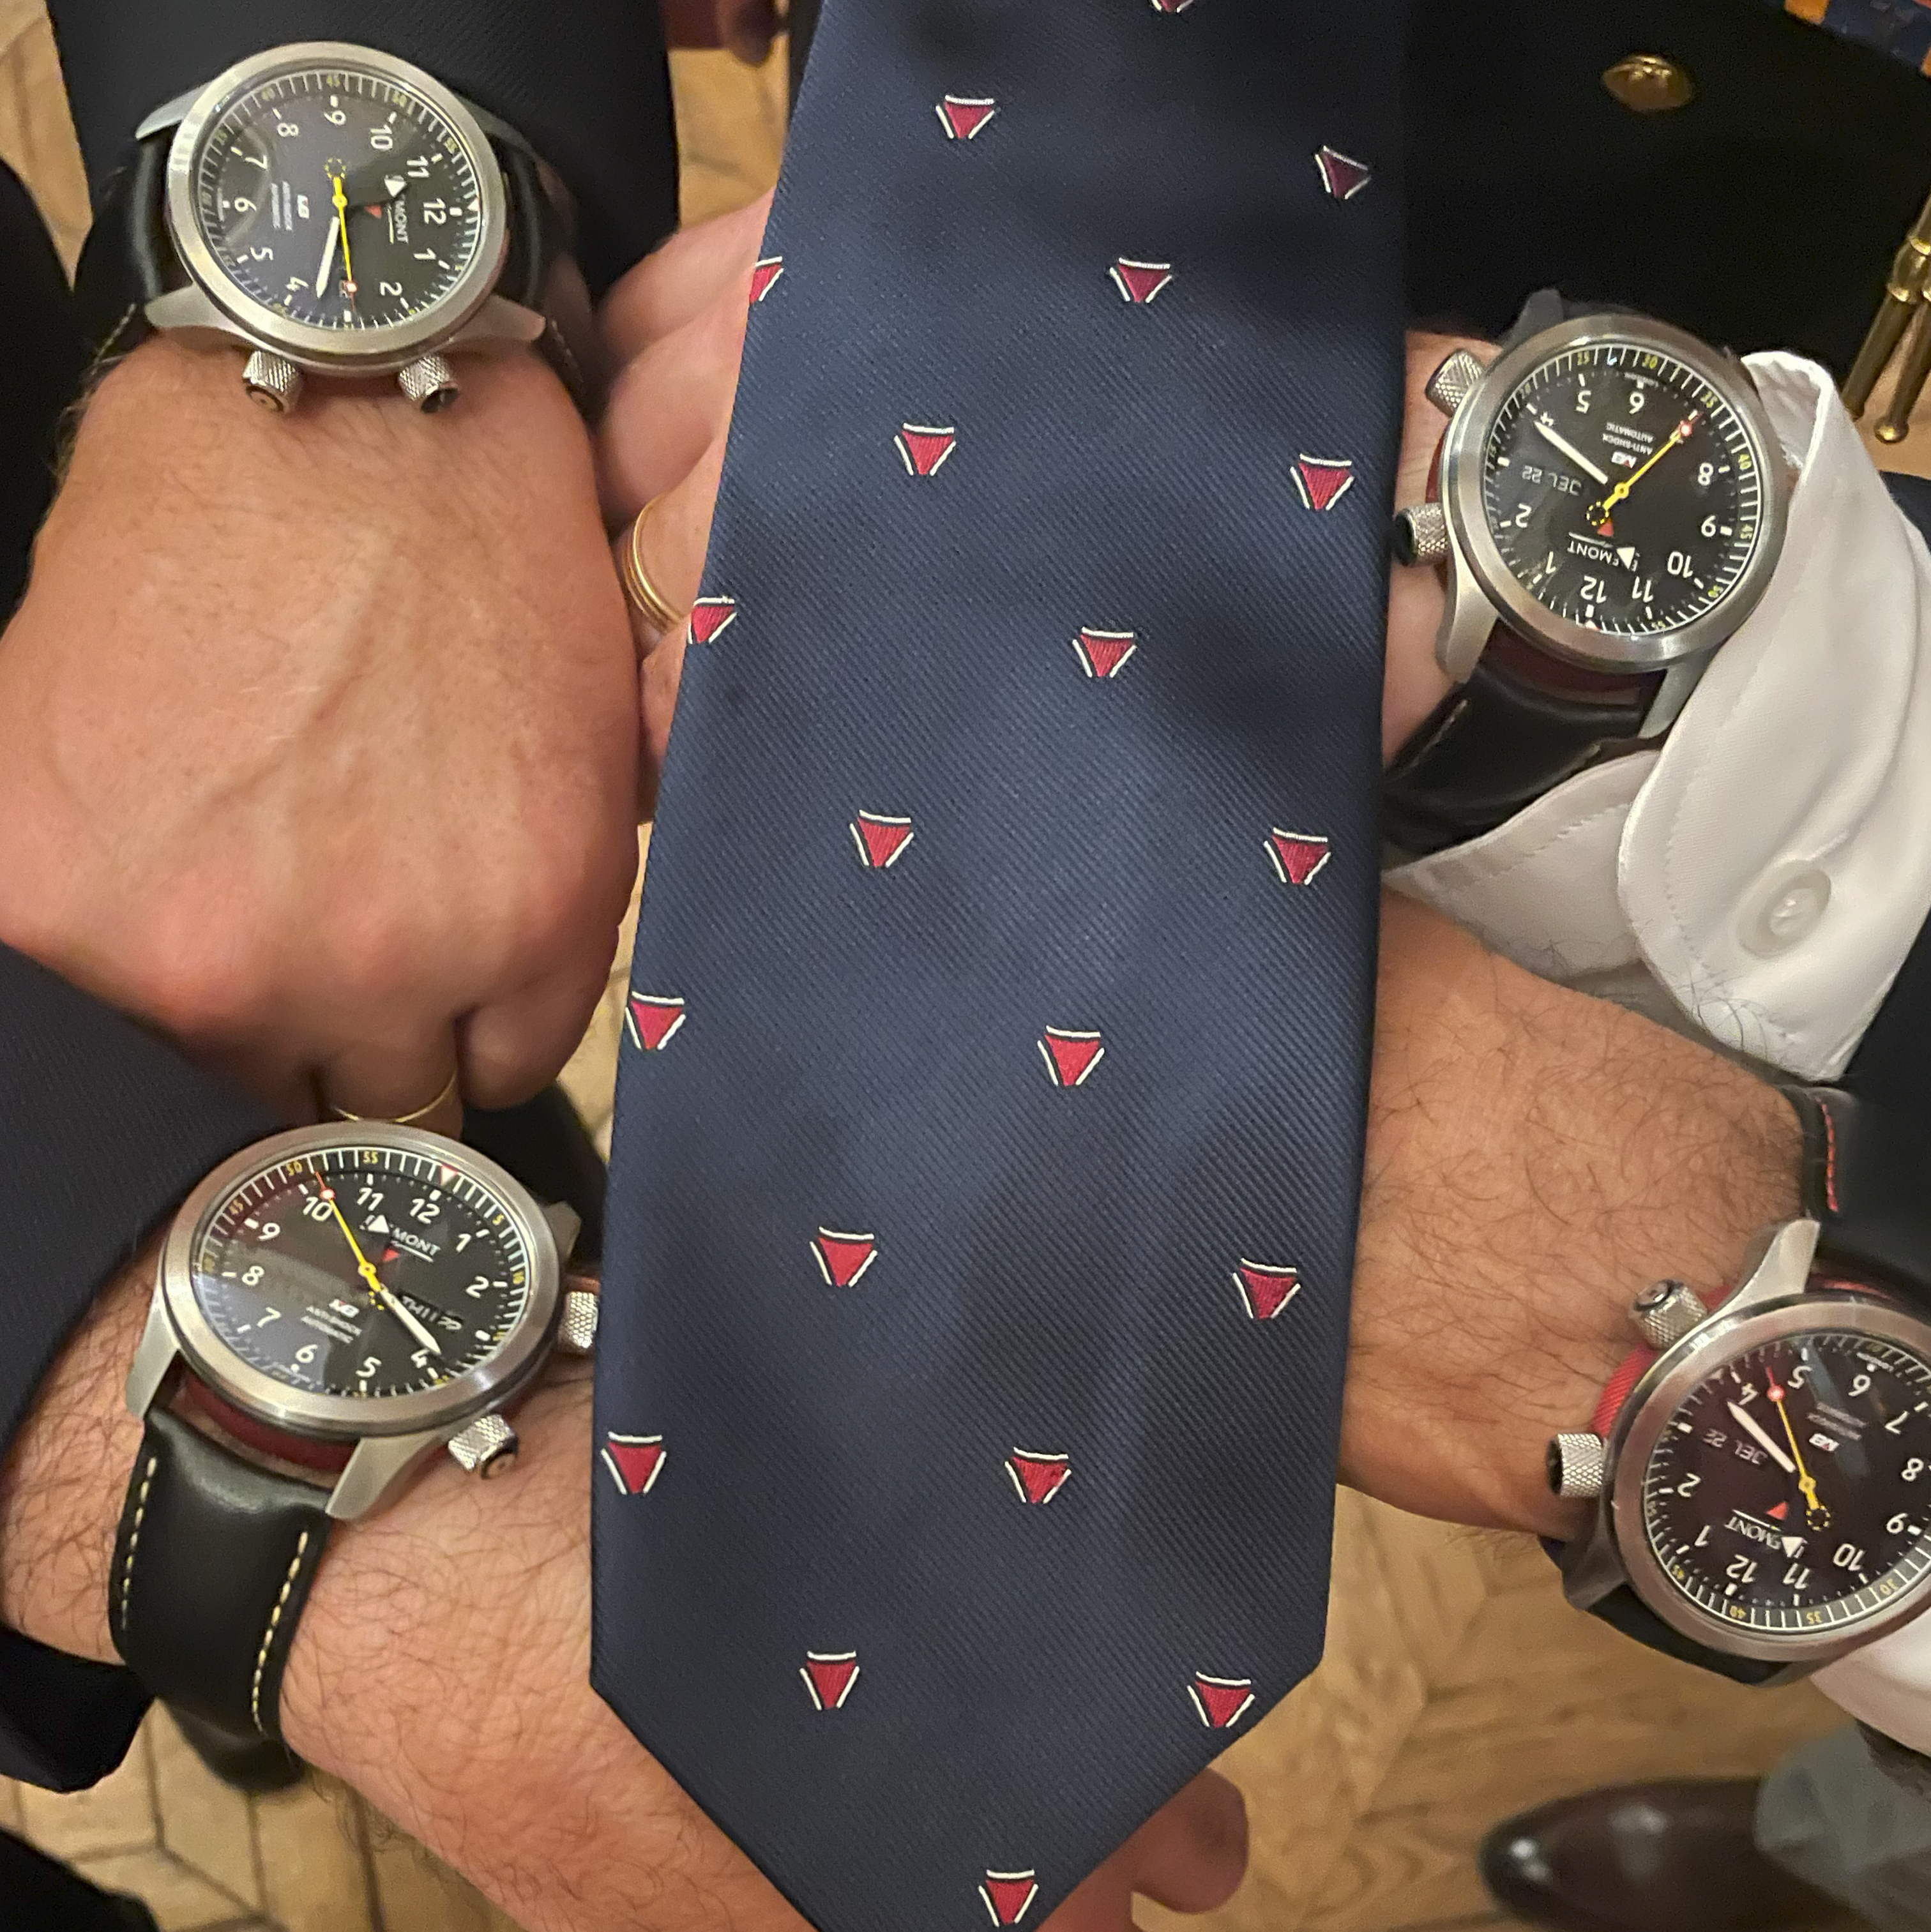 Ejectees with their MB1 watches and Tie